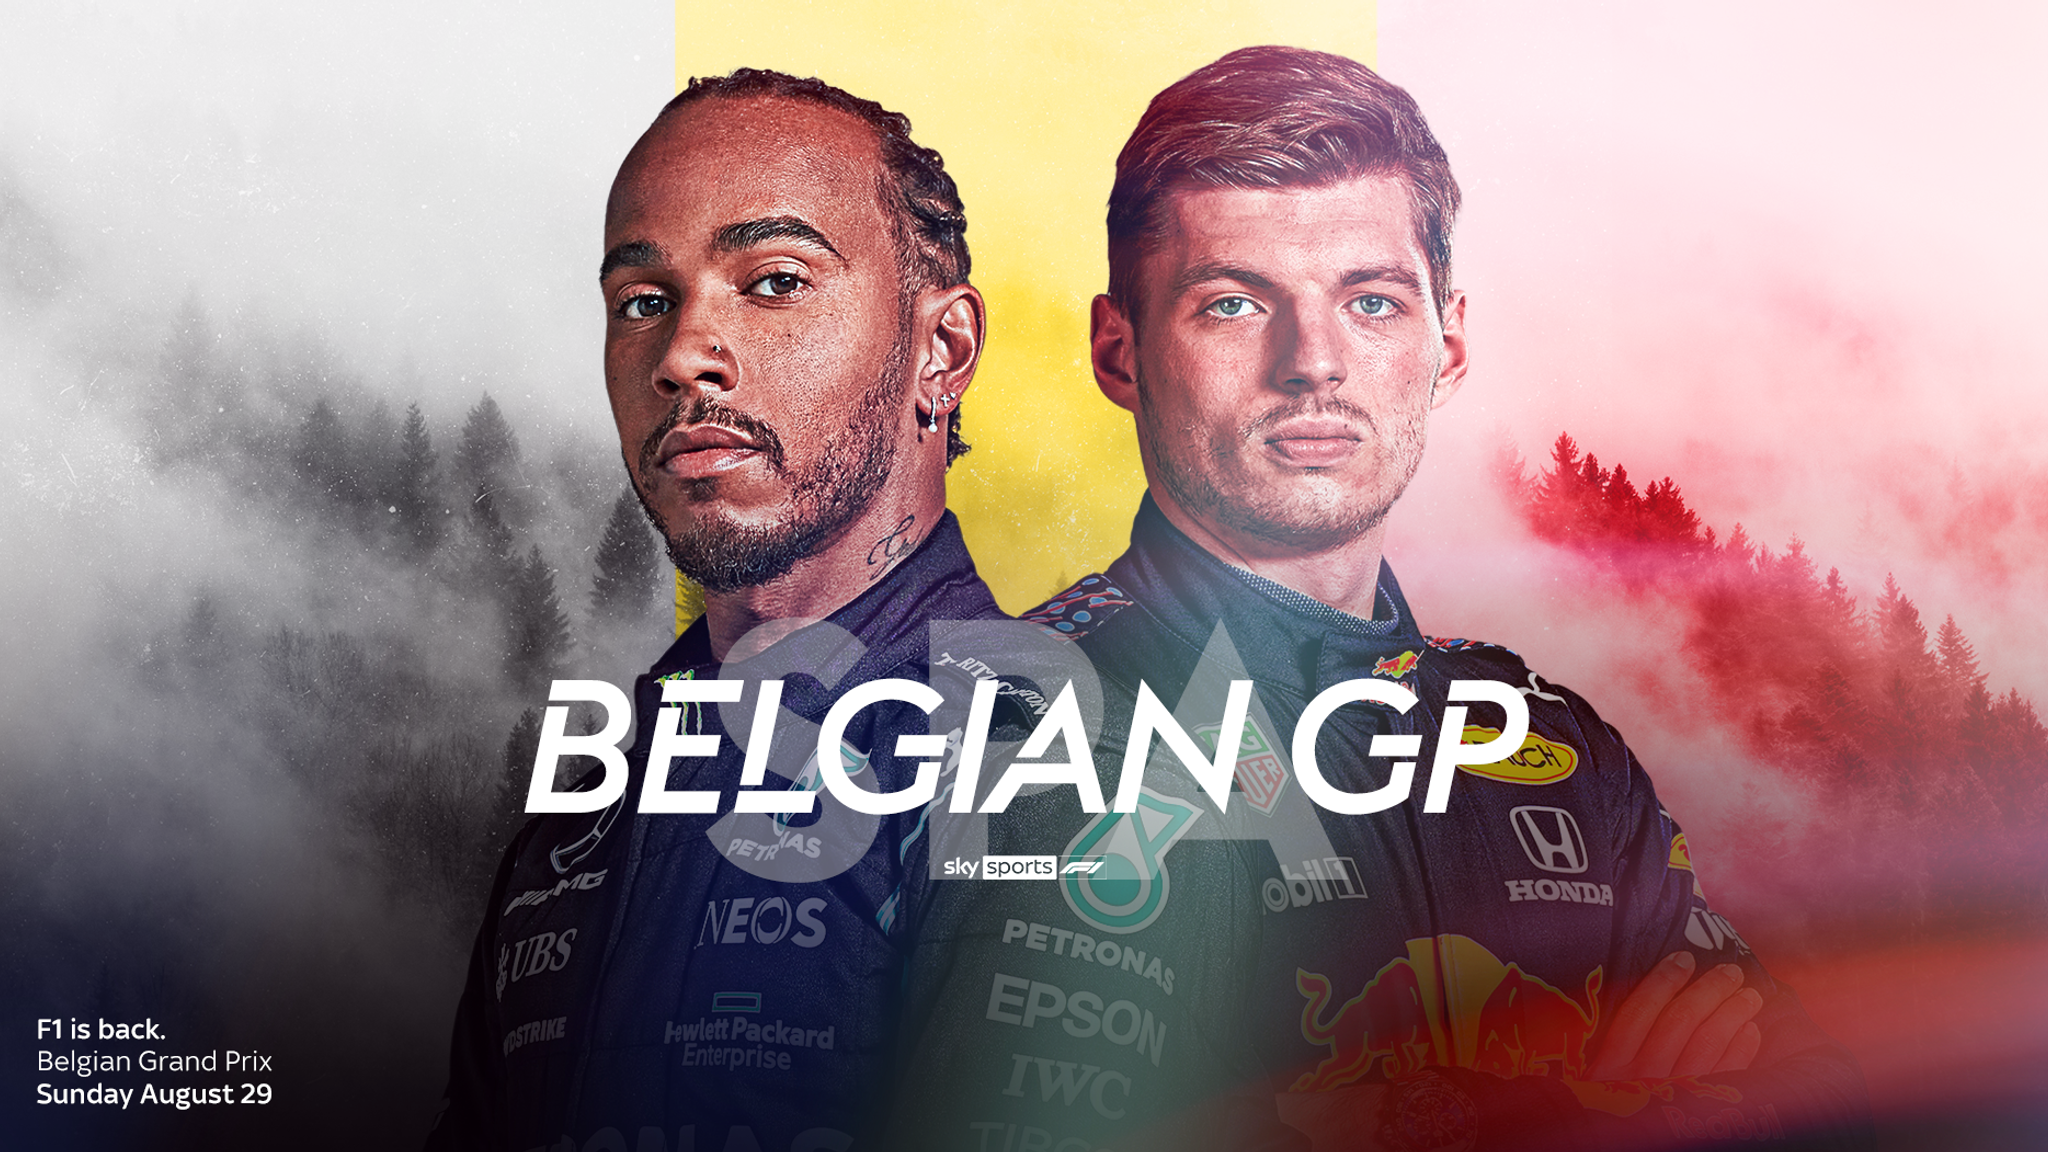 Belgian GP schedule When to watch the race and build-up live on Sky Sports F1 F1 News